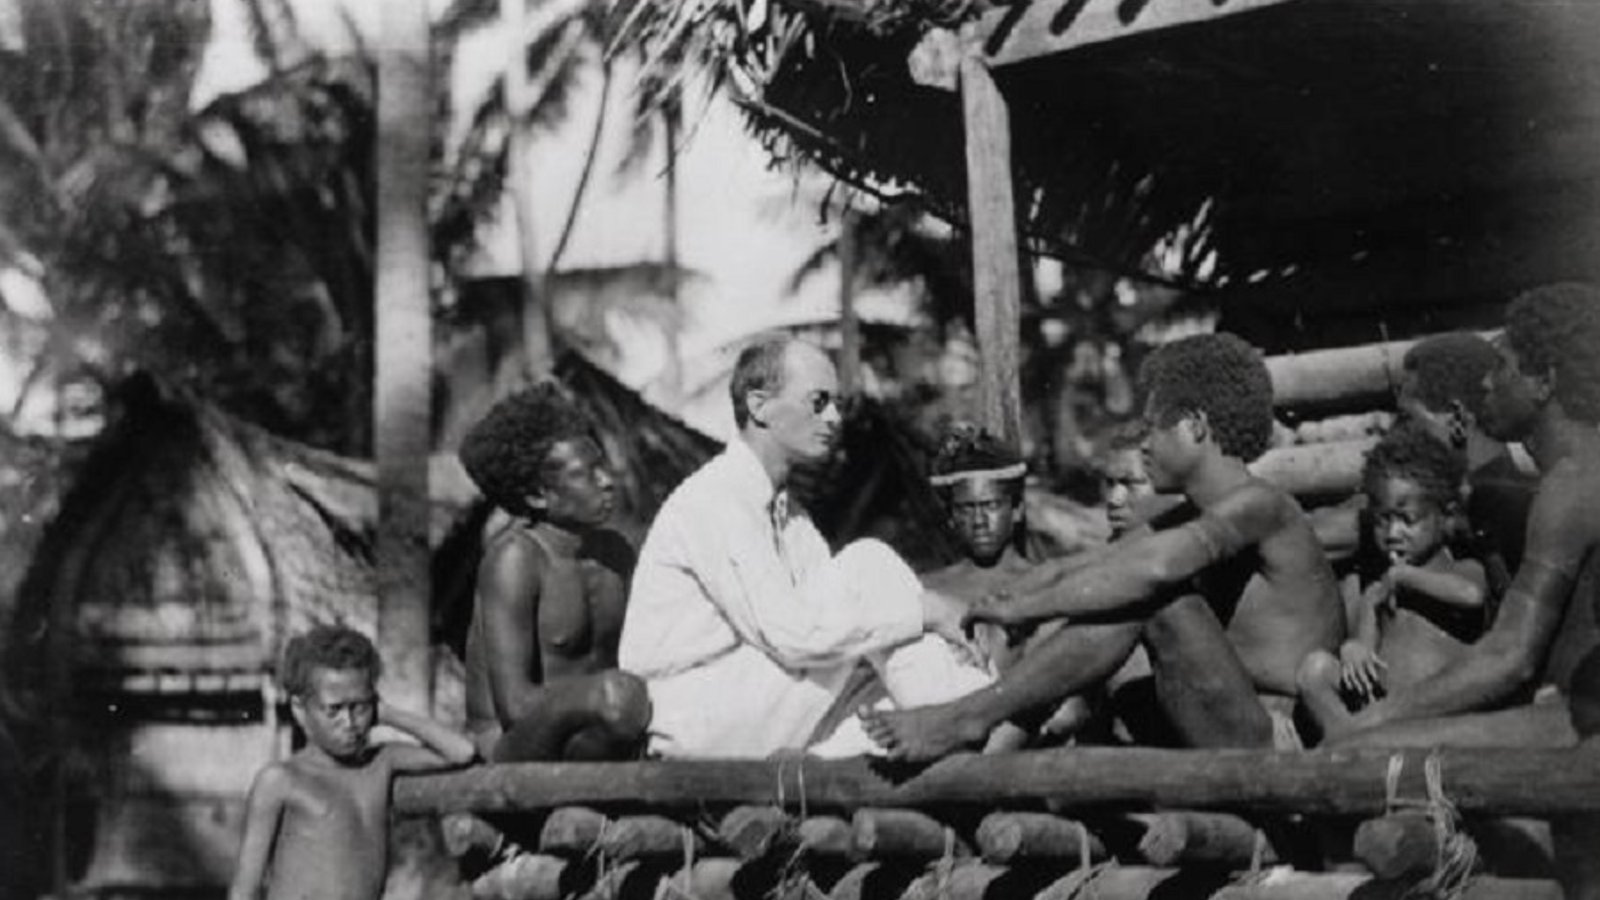 Savage Memory - A Founding Father of Anthropology and His Studies in Papua New Guinea